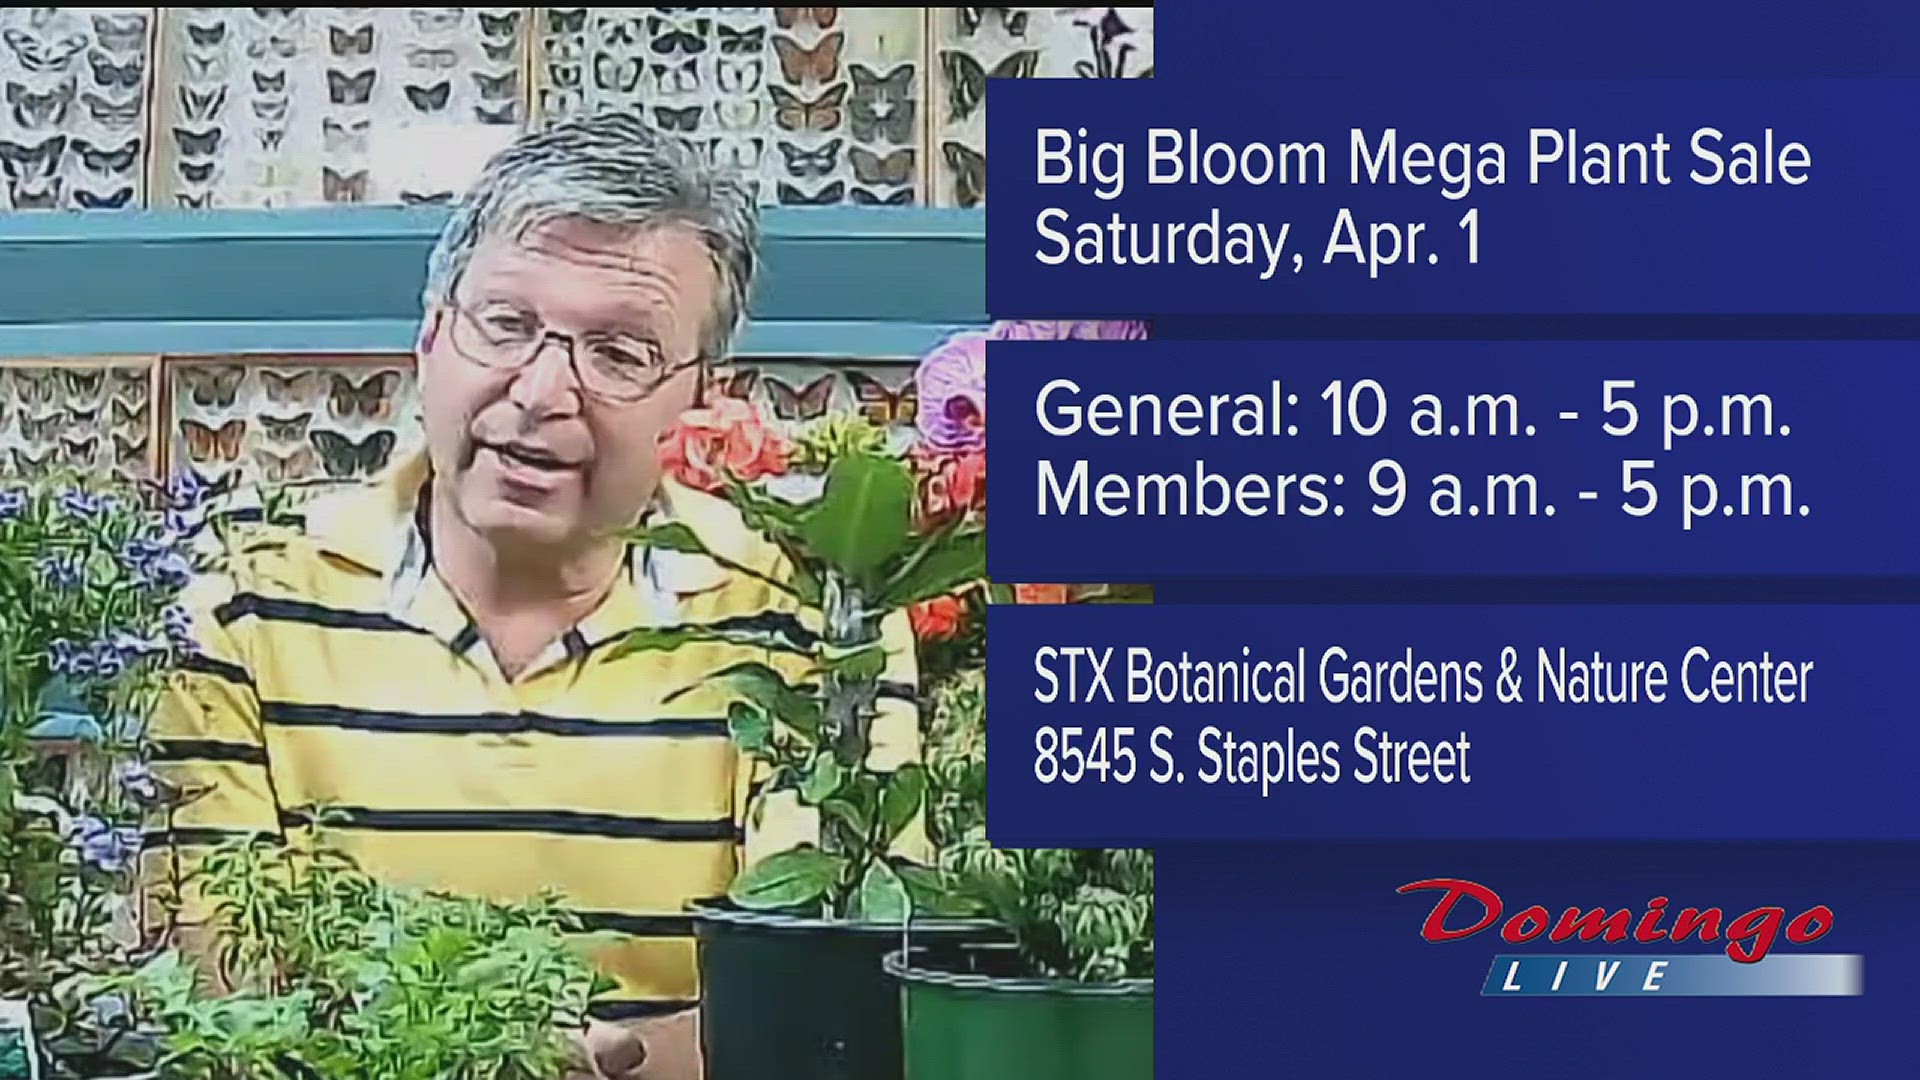 South Texas Botanical Gardens & Nature Center Exec. Director Dr. Michael Womack joined us live to invite the public to attend the Big Bloom Mega Plant Sale Apr. 1.